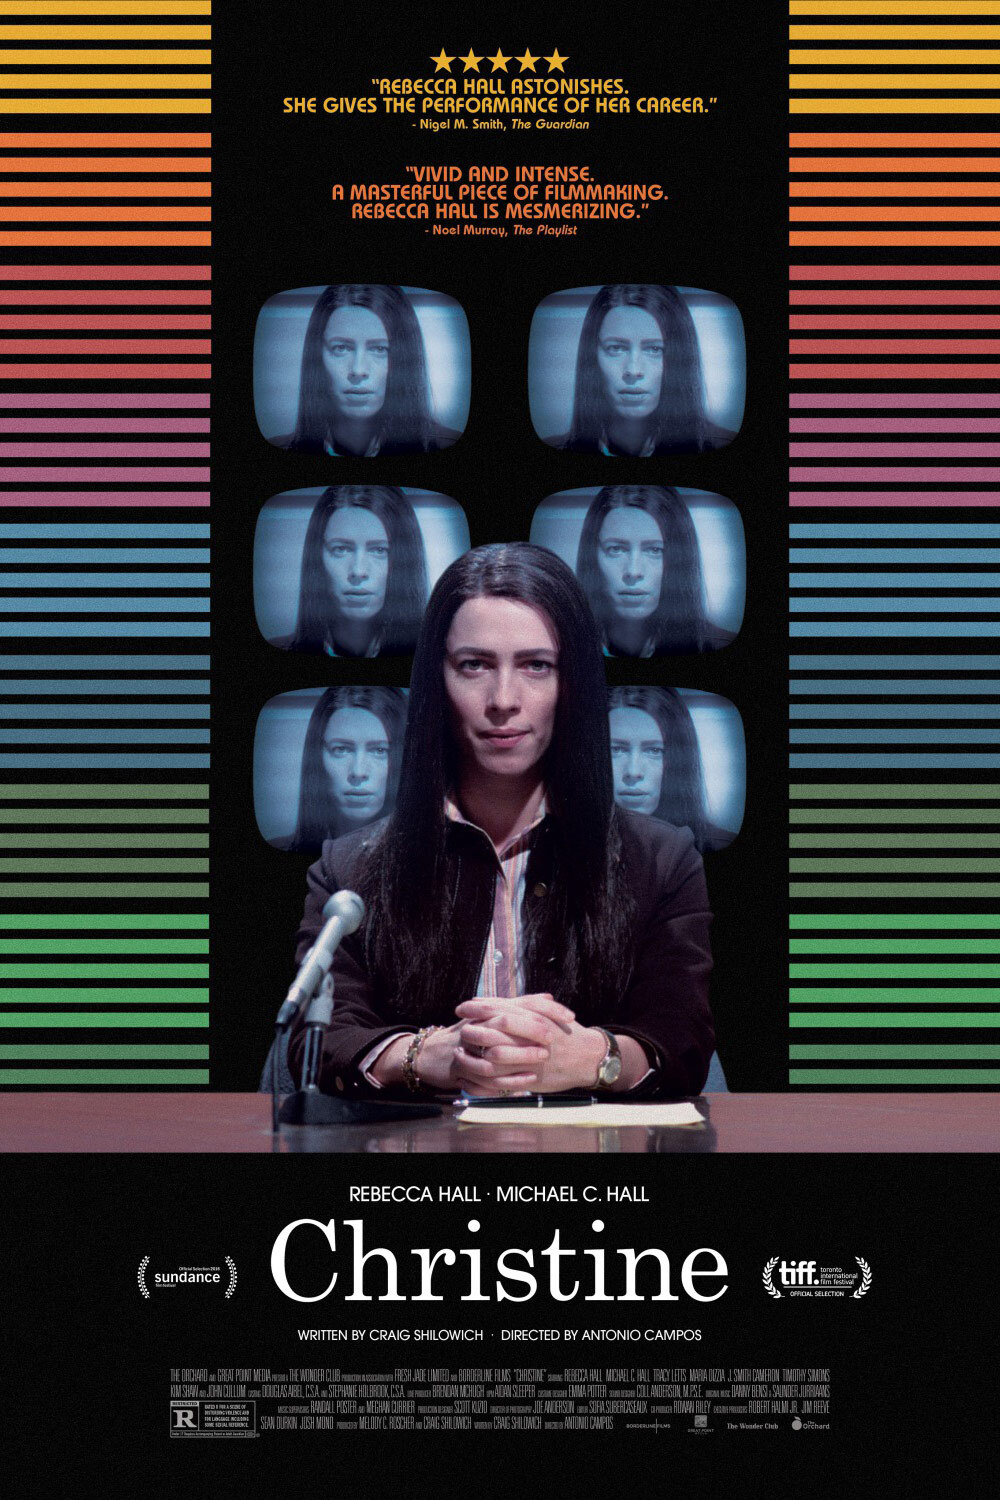 Movie poster for Christine, woman at microphone in front of tv screens